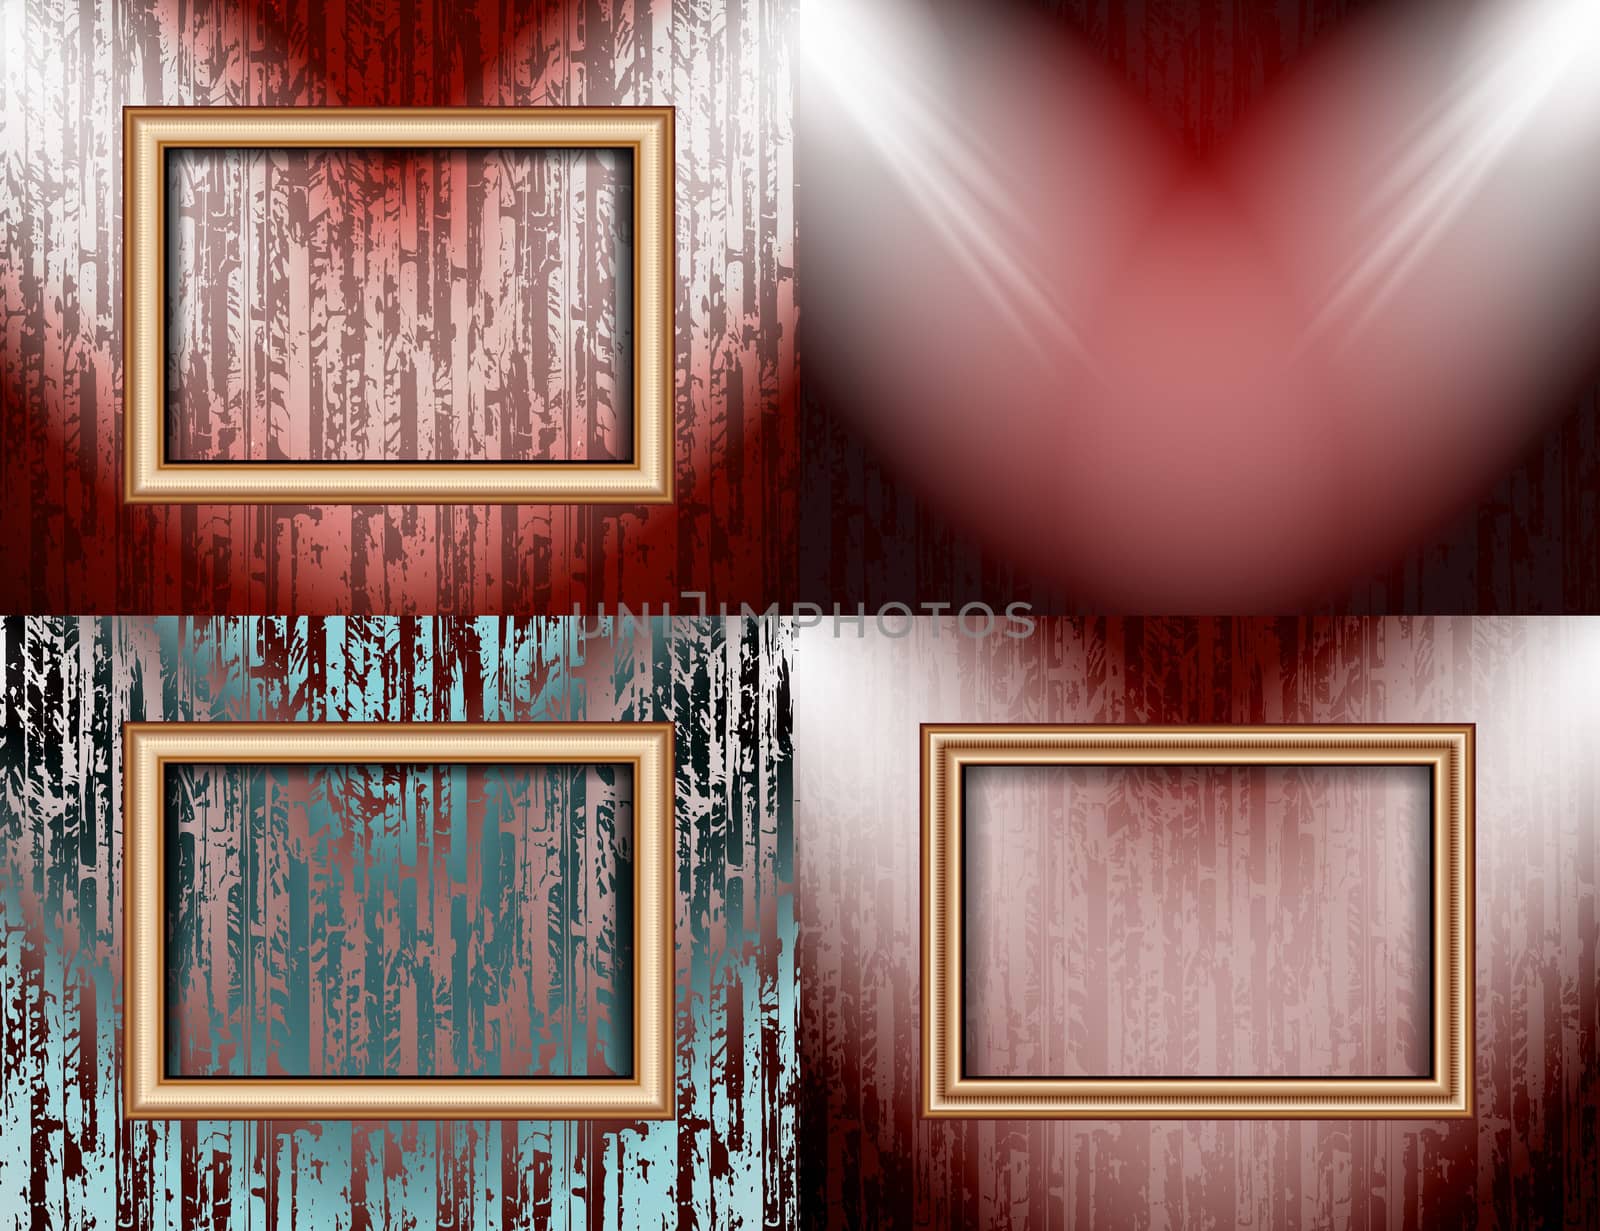 Set of Blank frame on a color wall lighting, abstract colored background with spotlights.  illustration